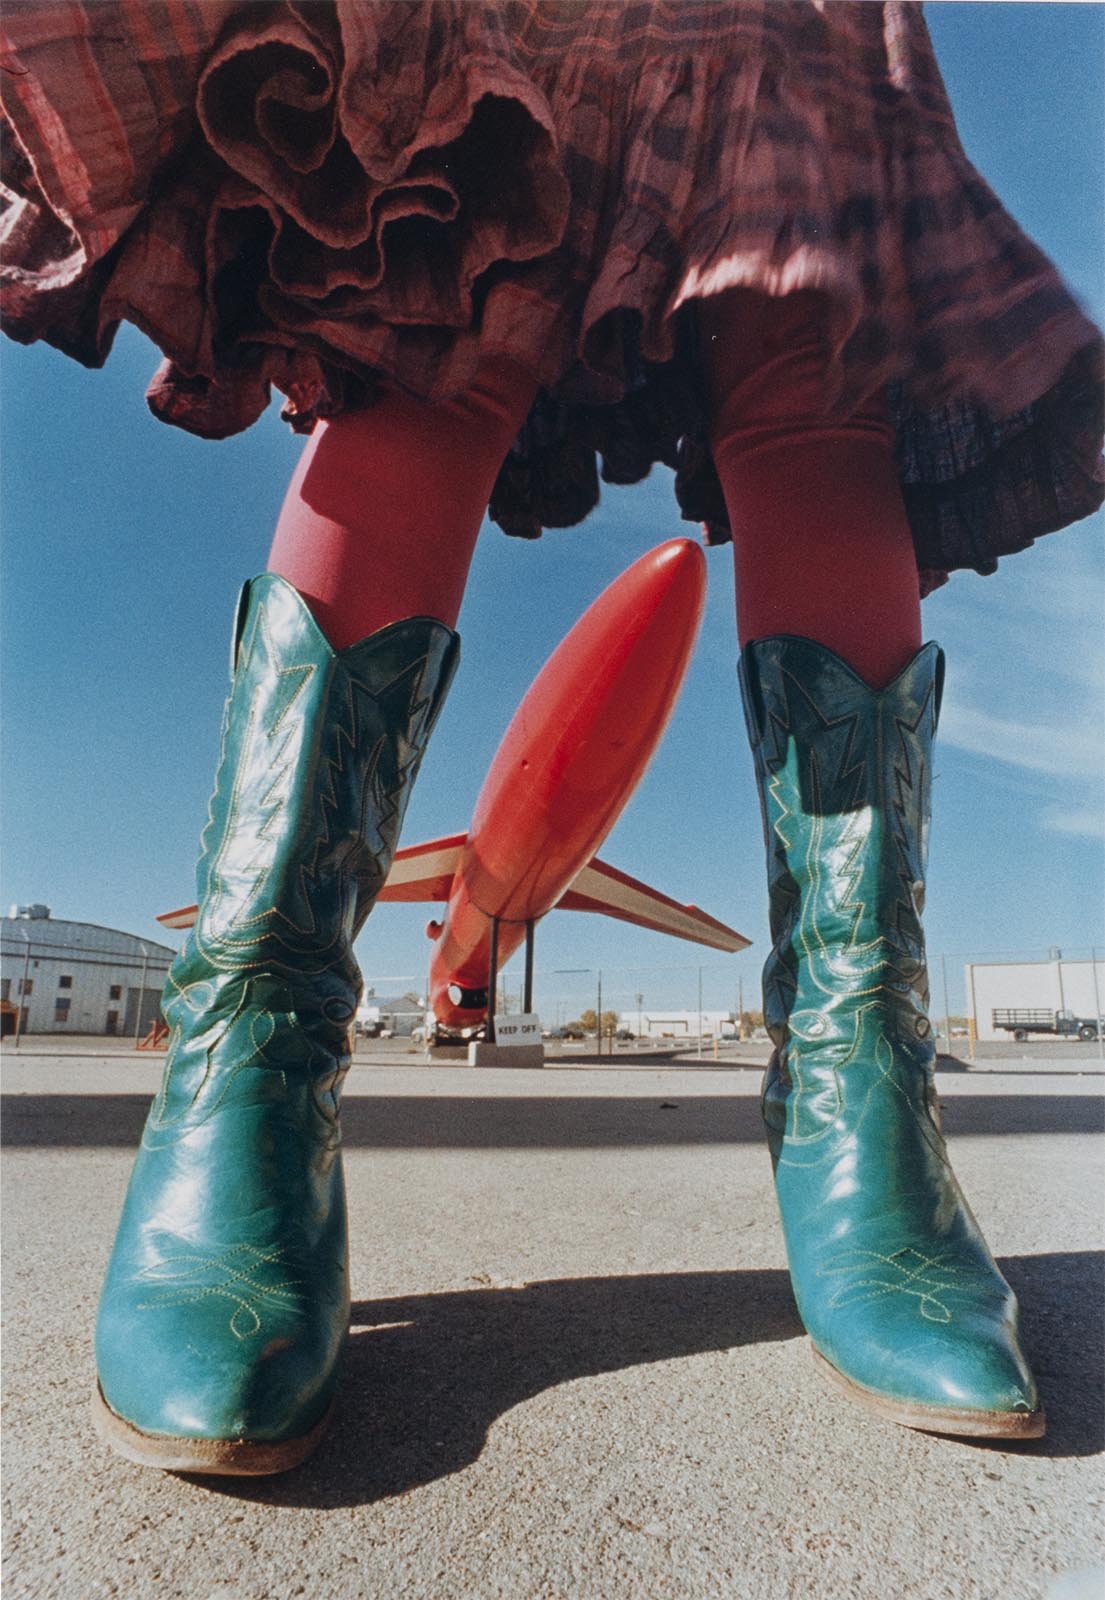 Anne Noggle, Vertical Stance (from the series: Earthbound), 1979